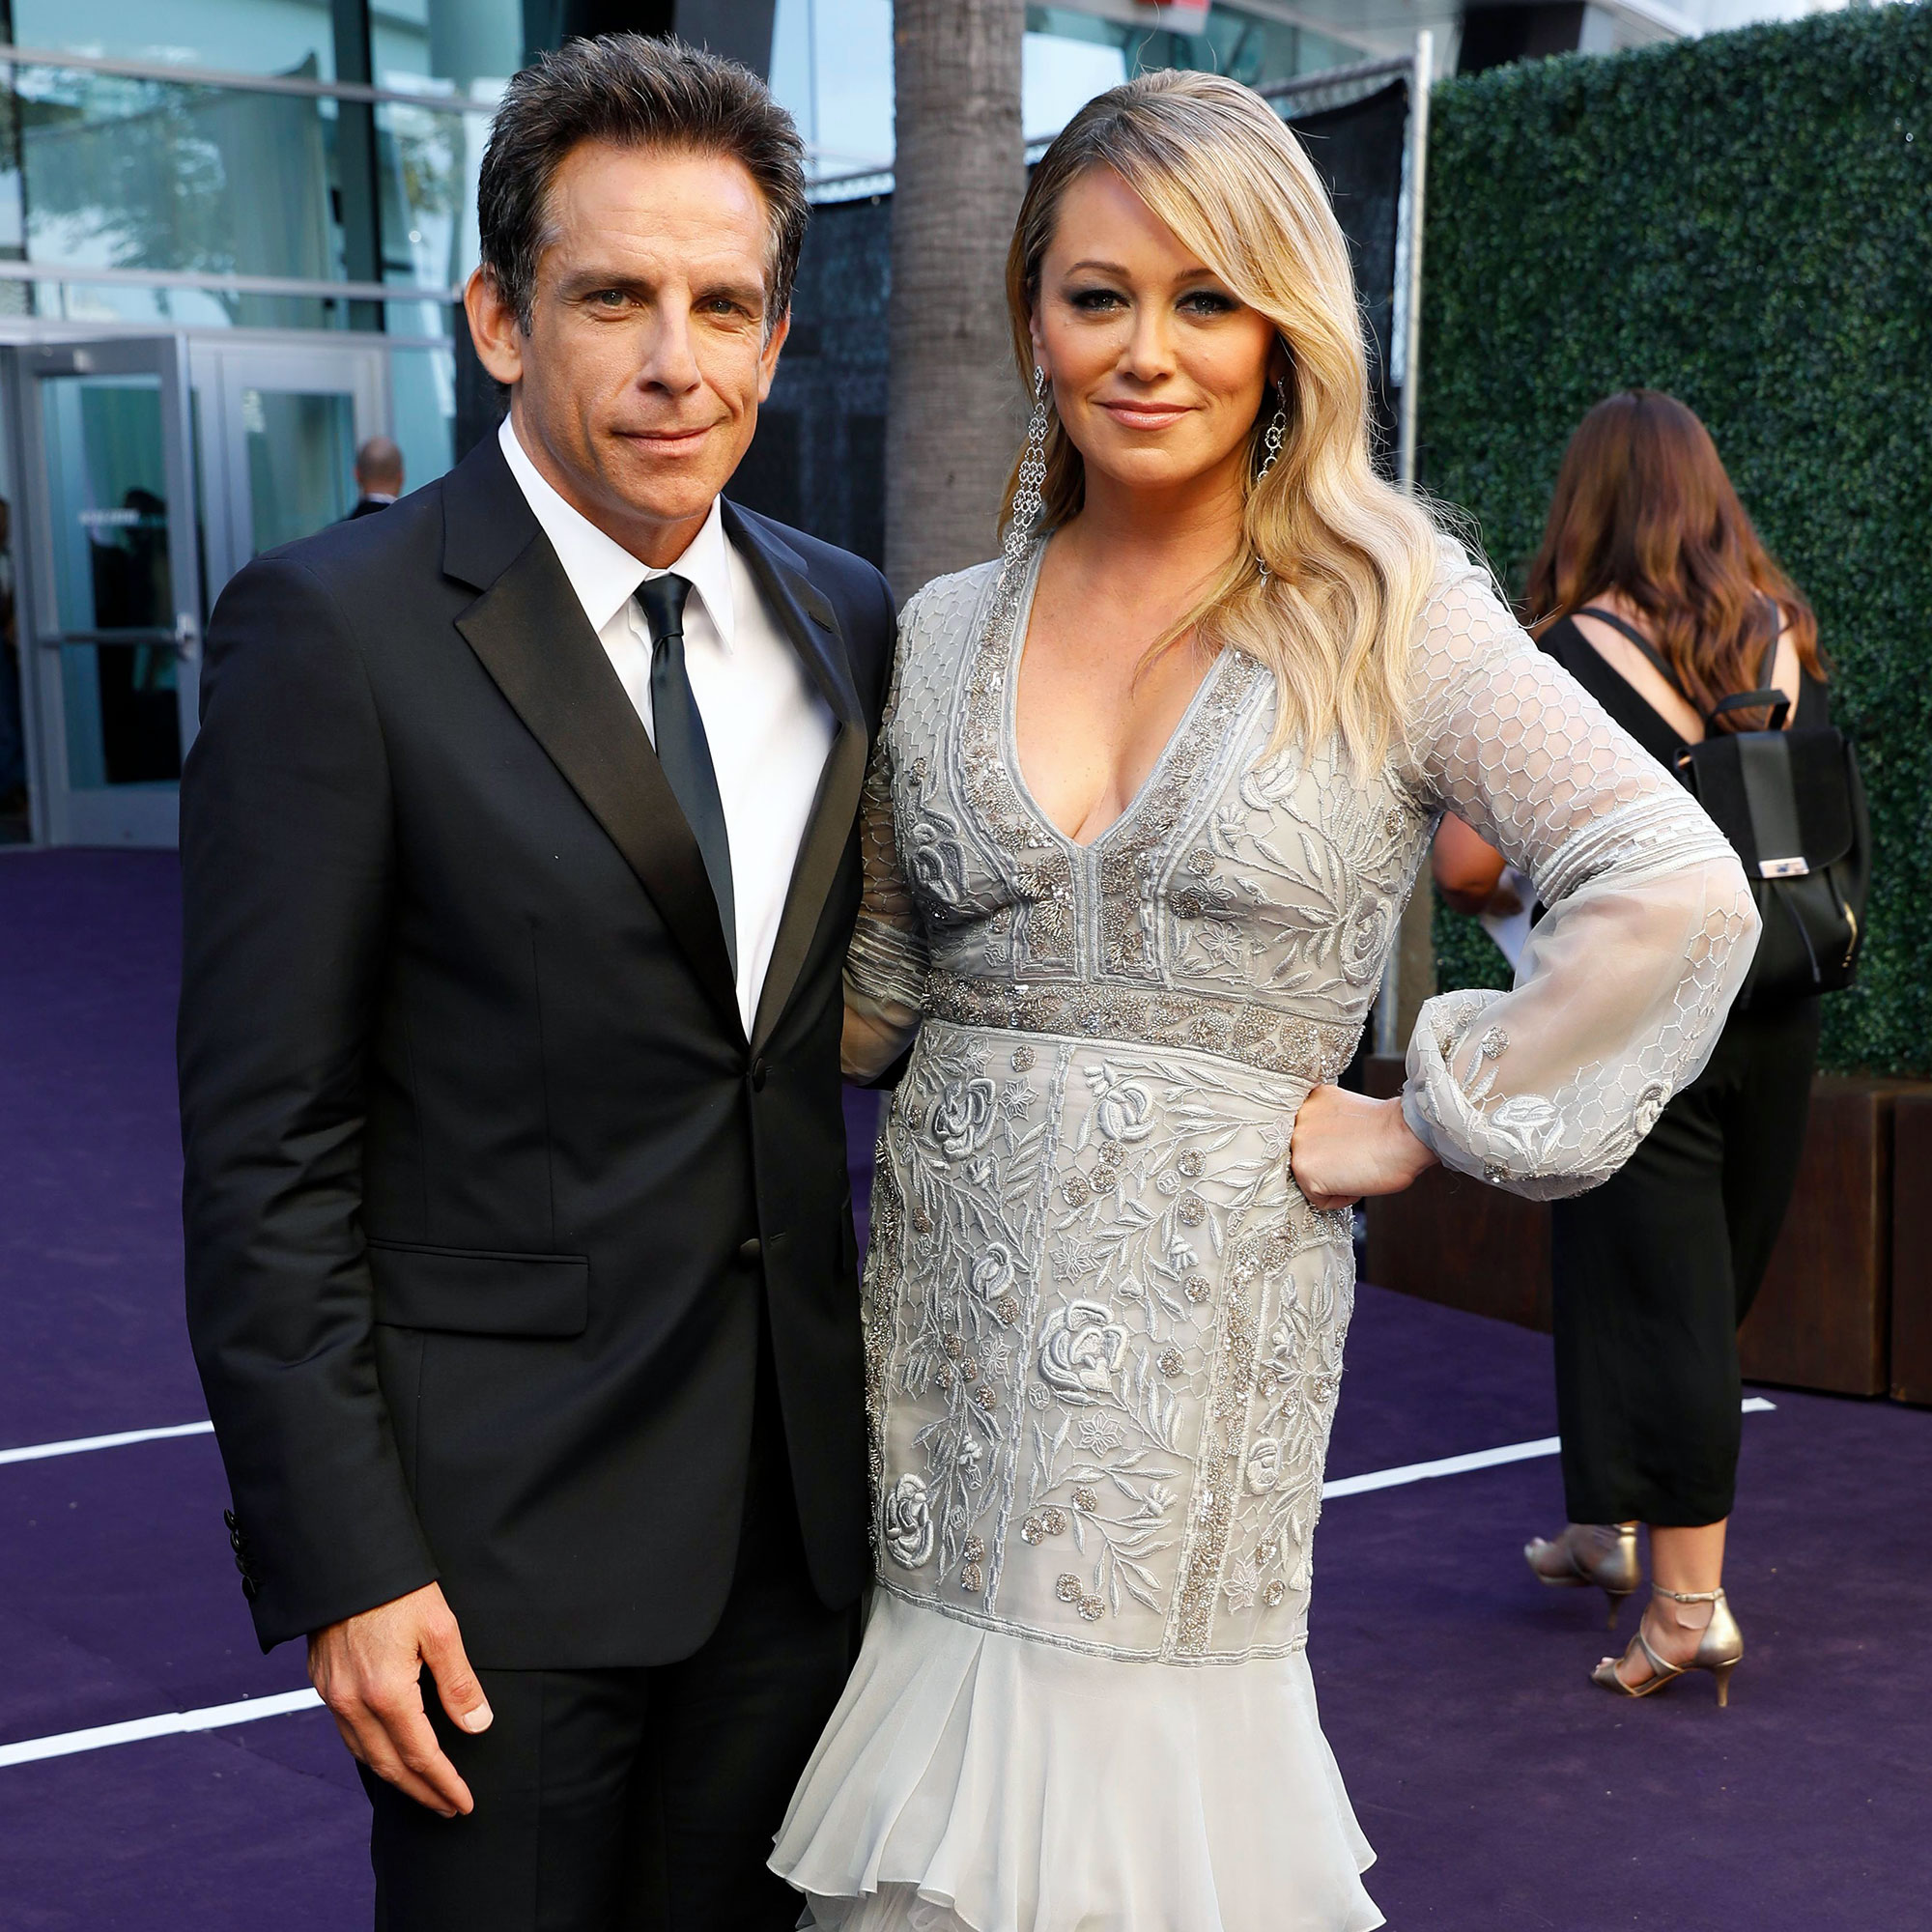 Ben Stiller with his wife Christine Taylor.